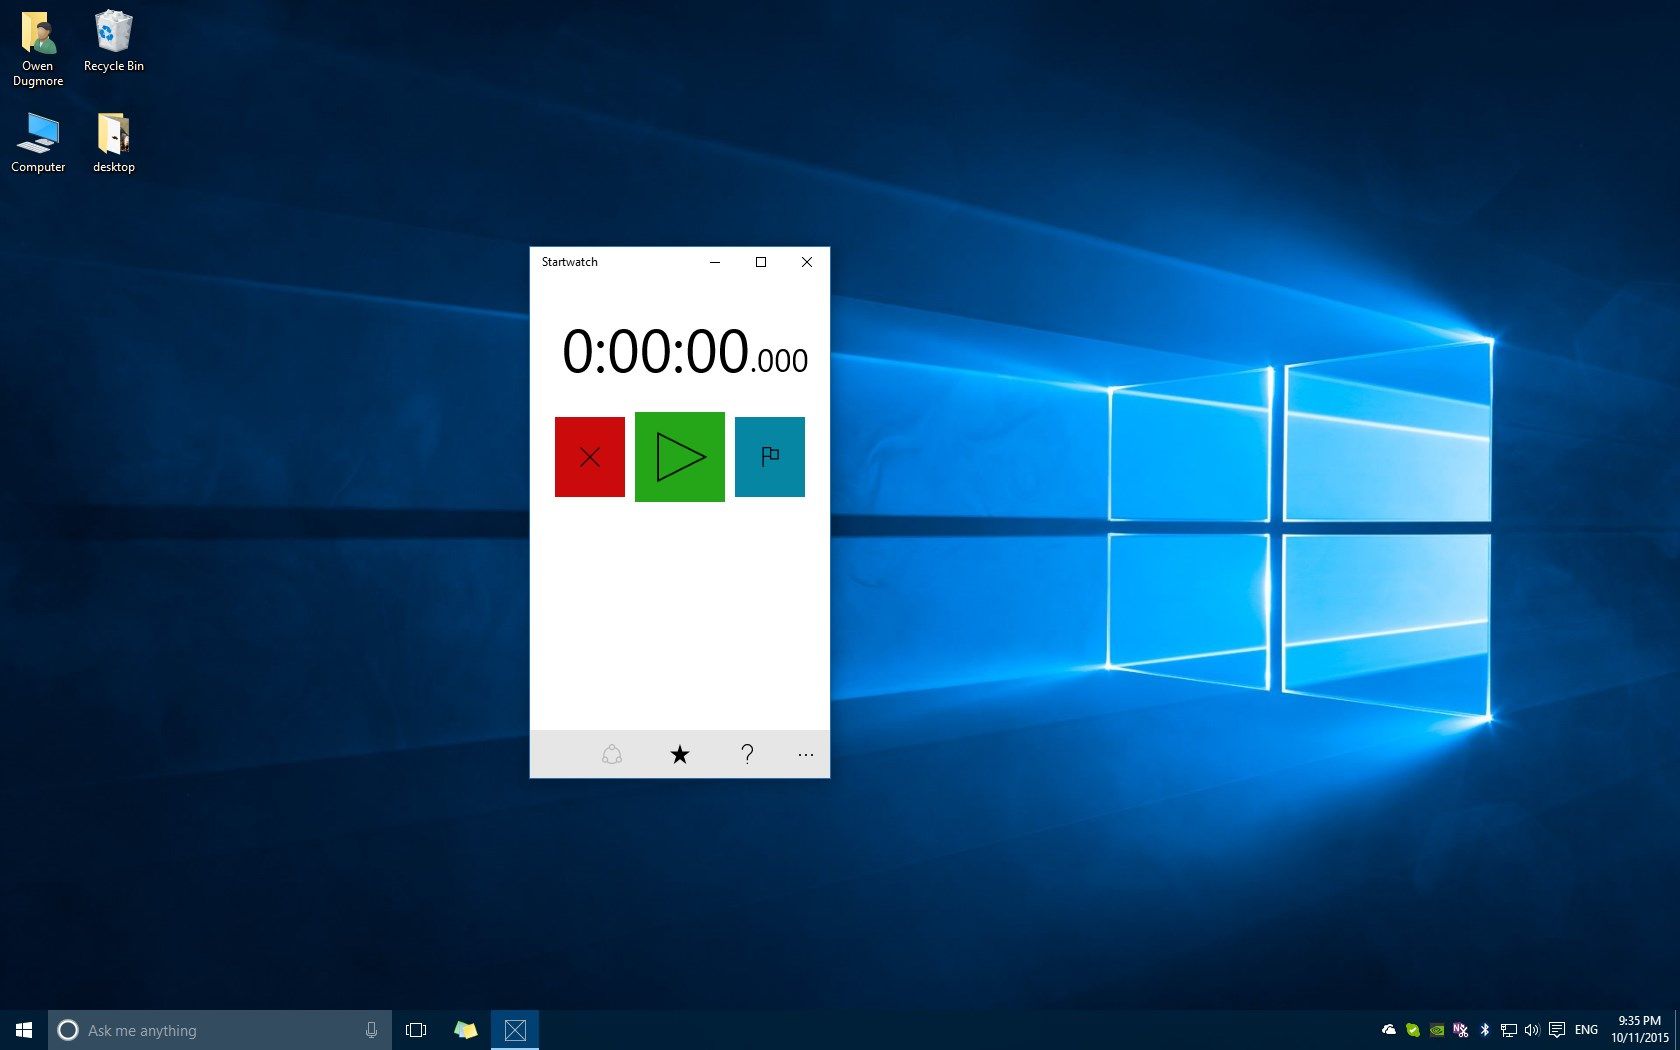 New sleek interface for Windows 10, without sacrificing performance or features